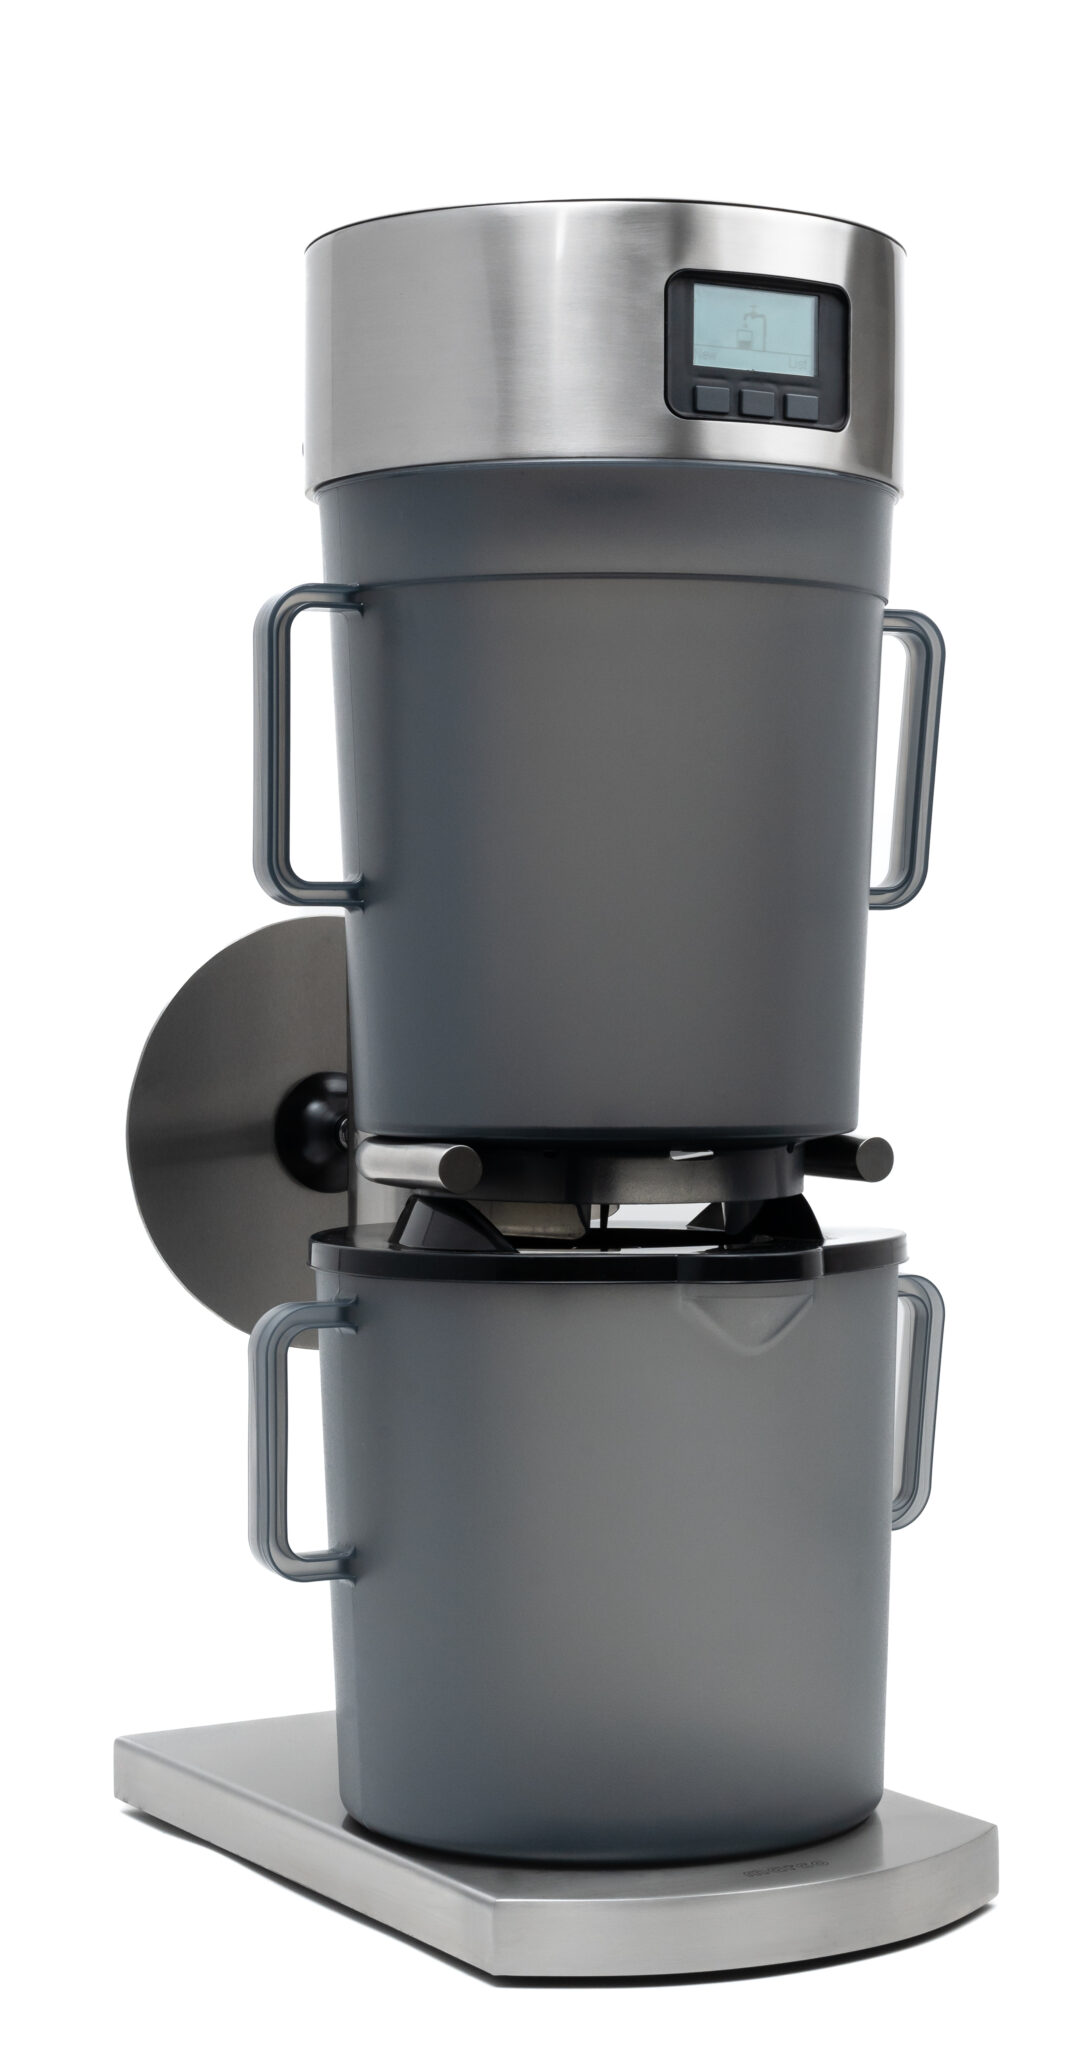 Timemore Cold Brew System